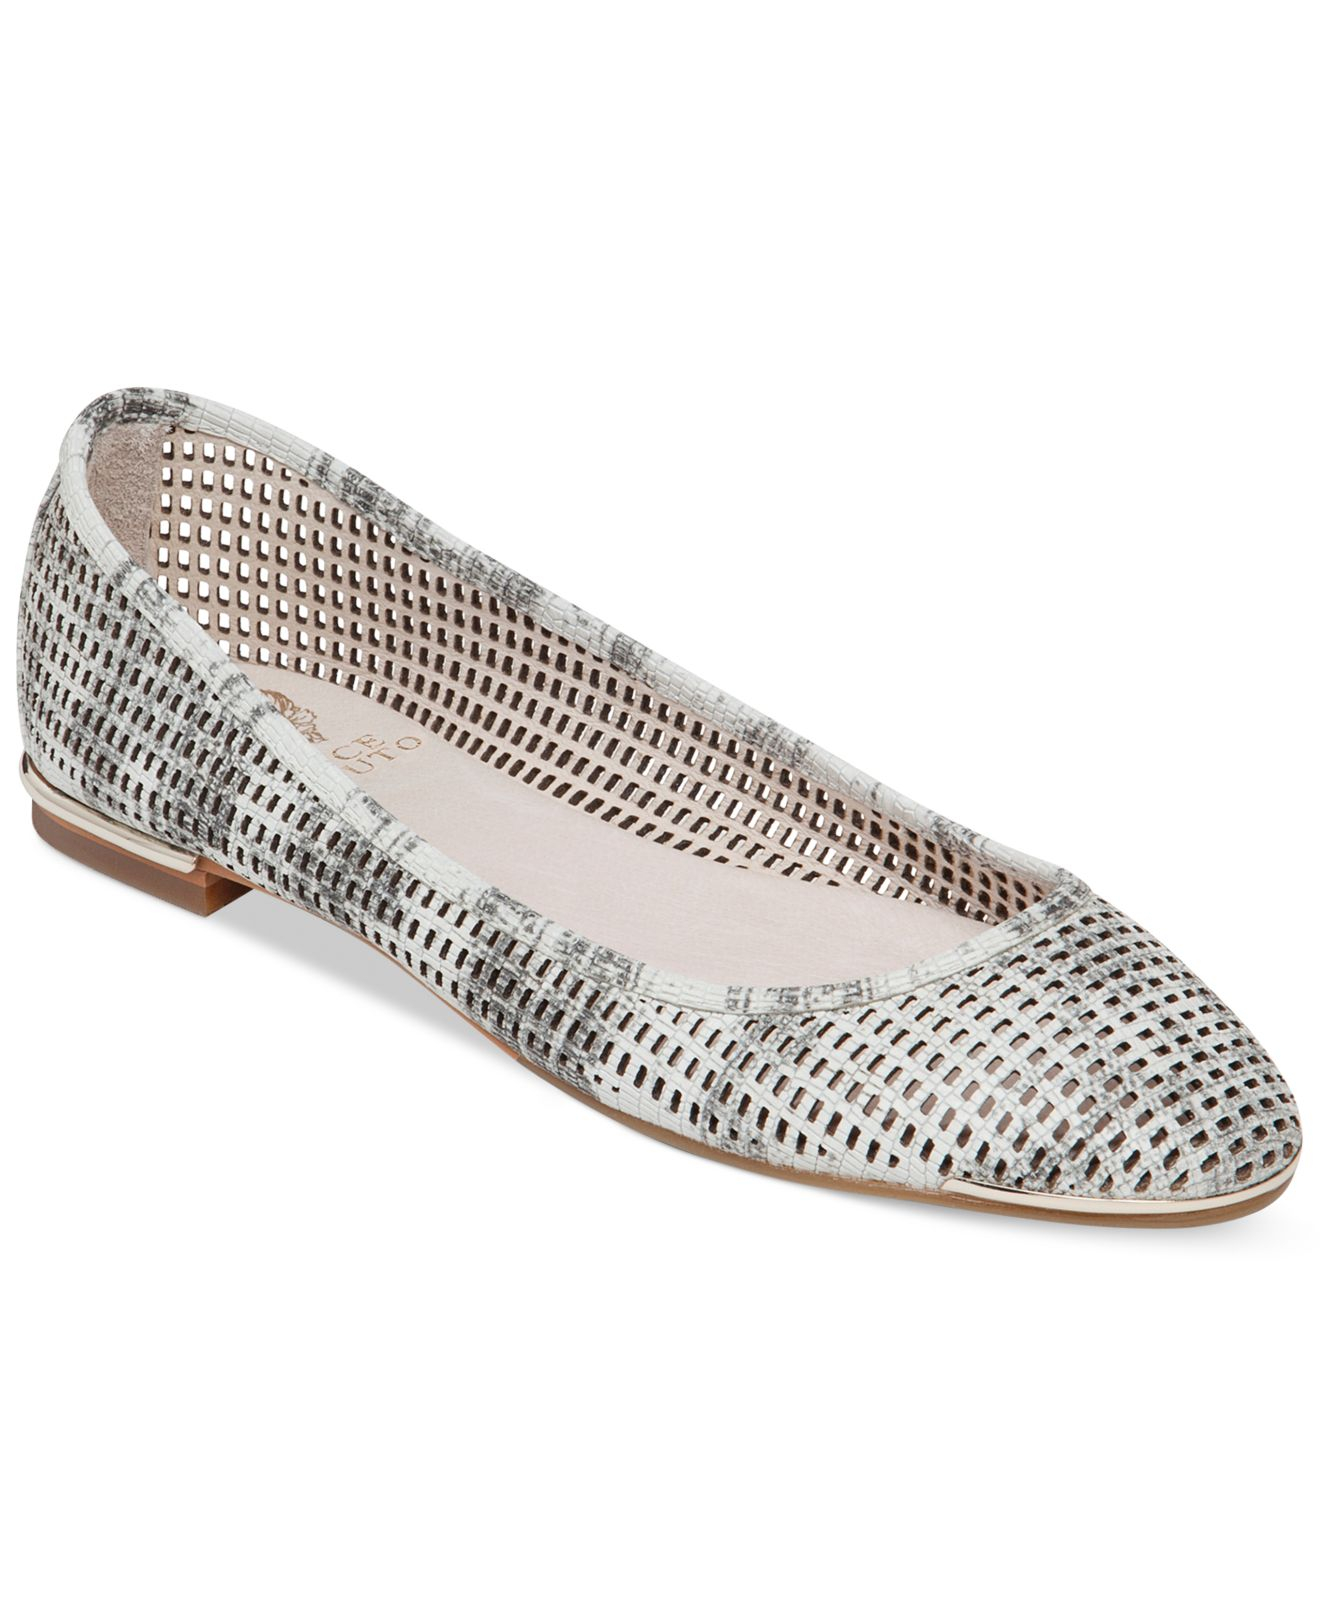 Vince Camuto Caya Flats in Stone (Gray) - Lyst